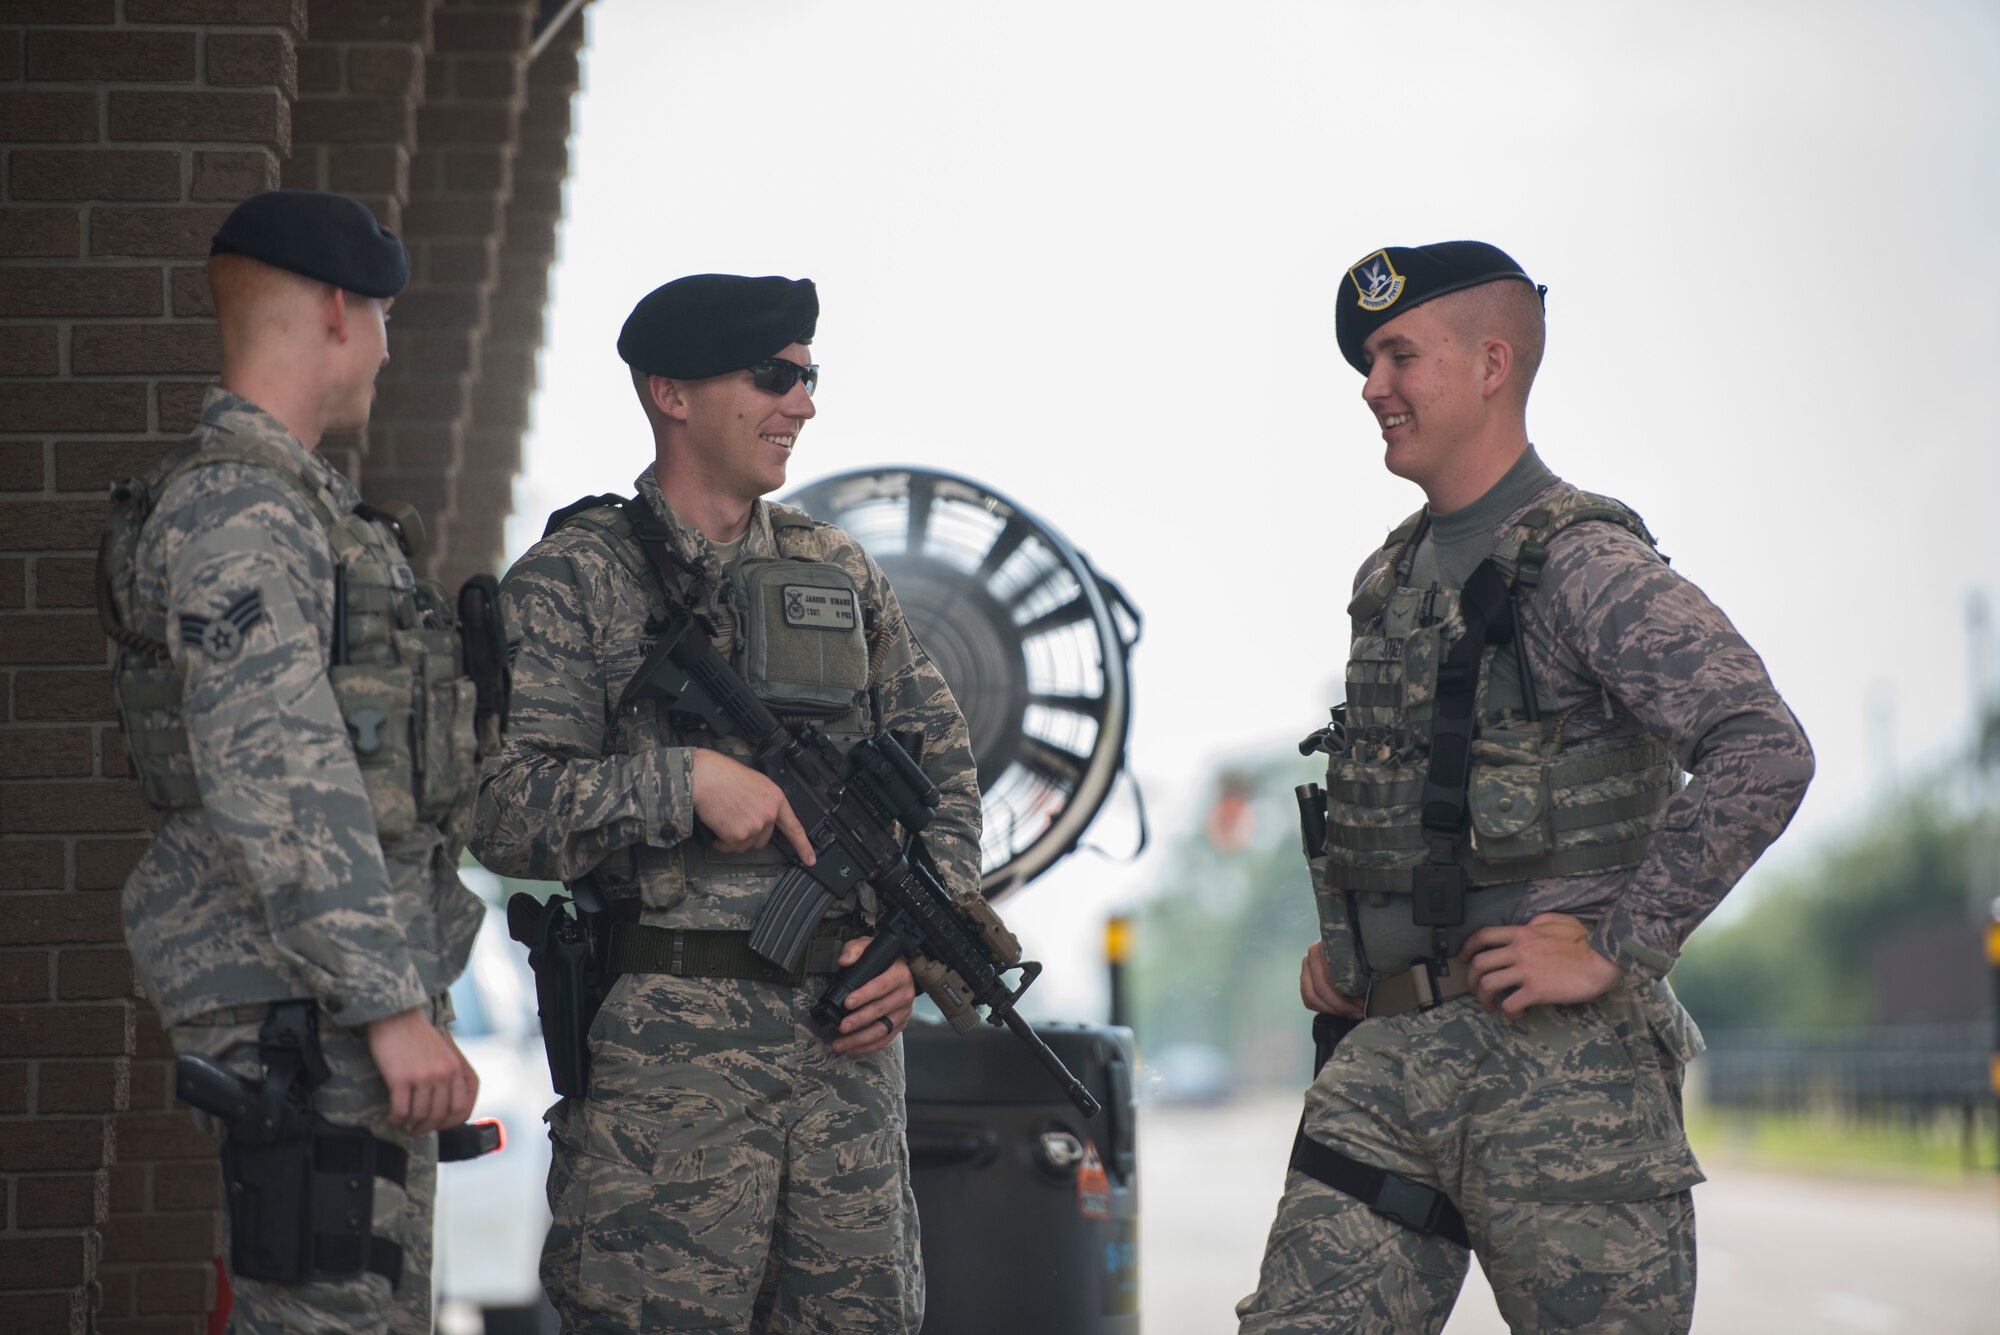 Tech. Sgt. Jarrod Kinard, 81st Security Forces Squadron flight chief, center, talks with Senior Airman Trevor Perley and Airman Joseph Maerkl, 81st SFS airmen, during a routine check up during a ride-along at Keesler Air Force Base, Miss., May 17, 2018. The ride-along program is part of the 81st SFS community involvement initiative where anyone, age 15 and up and with base access, can see what it's like to be a defender. If you are interested in the ride-along program, please contact Tech. Sgt. Matthew Oleson at 228-376-6601. (U.S. Air Force photo by Senior Airman Travis Beihl)